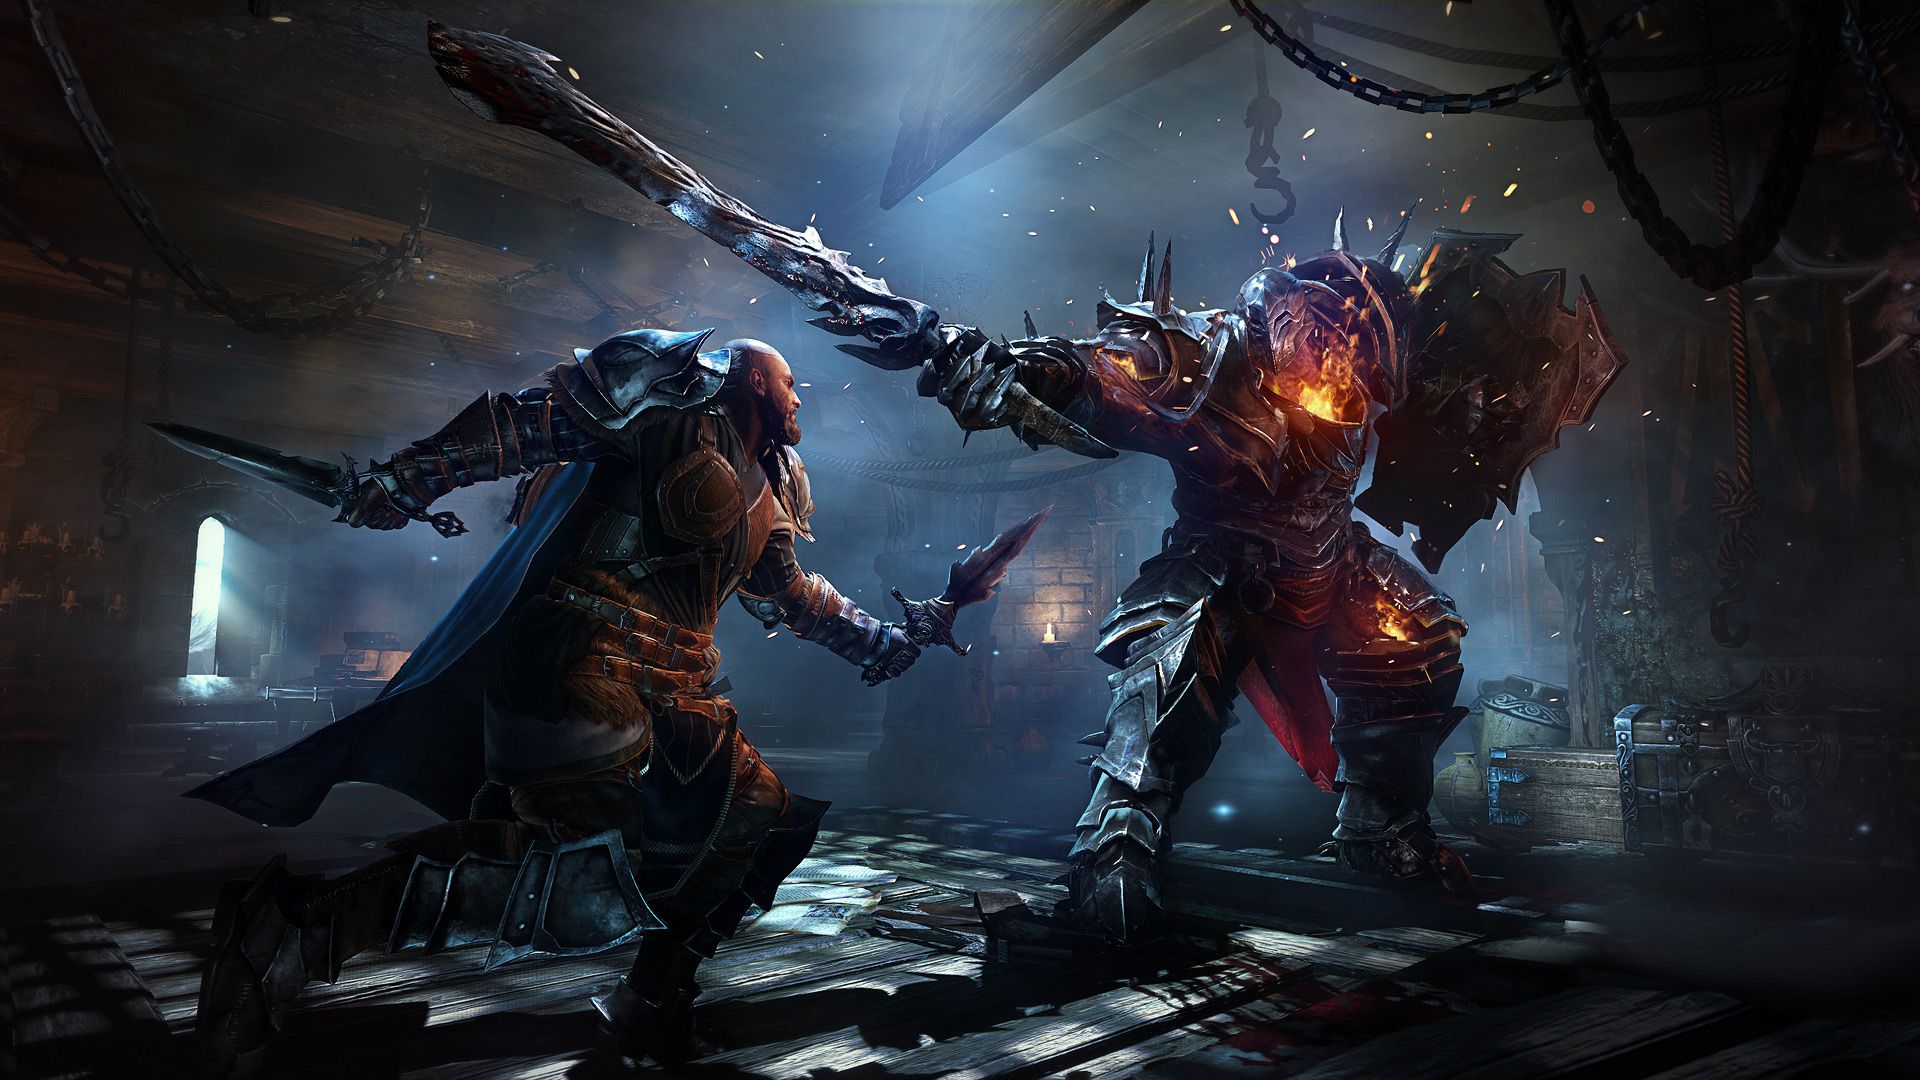 Lords of the Fallen Gameplay Video  Lords of the fallen, Lord, Gameplay